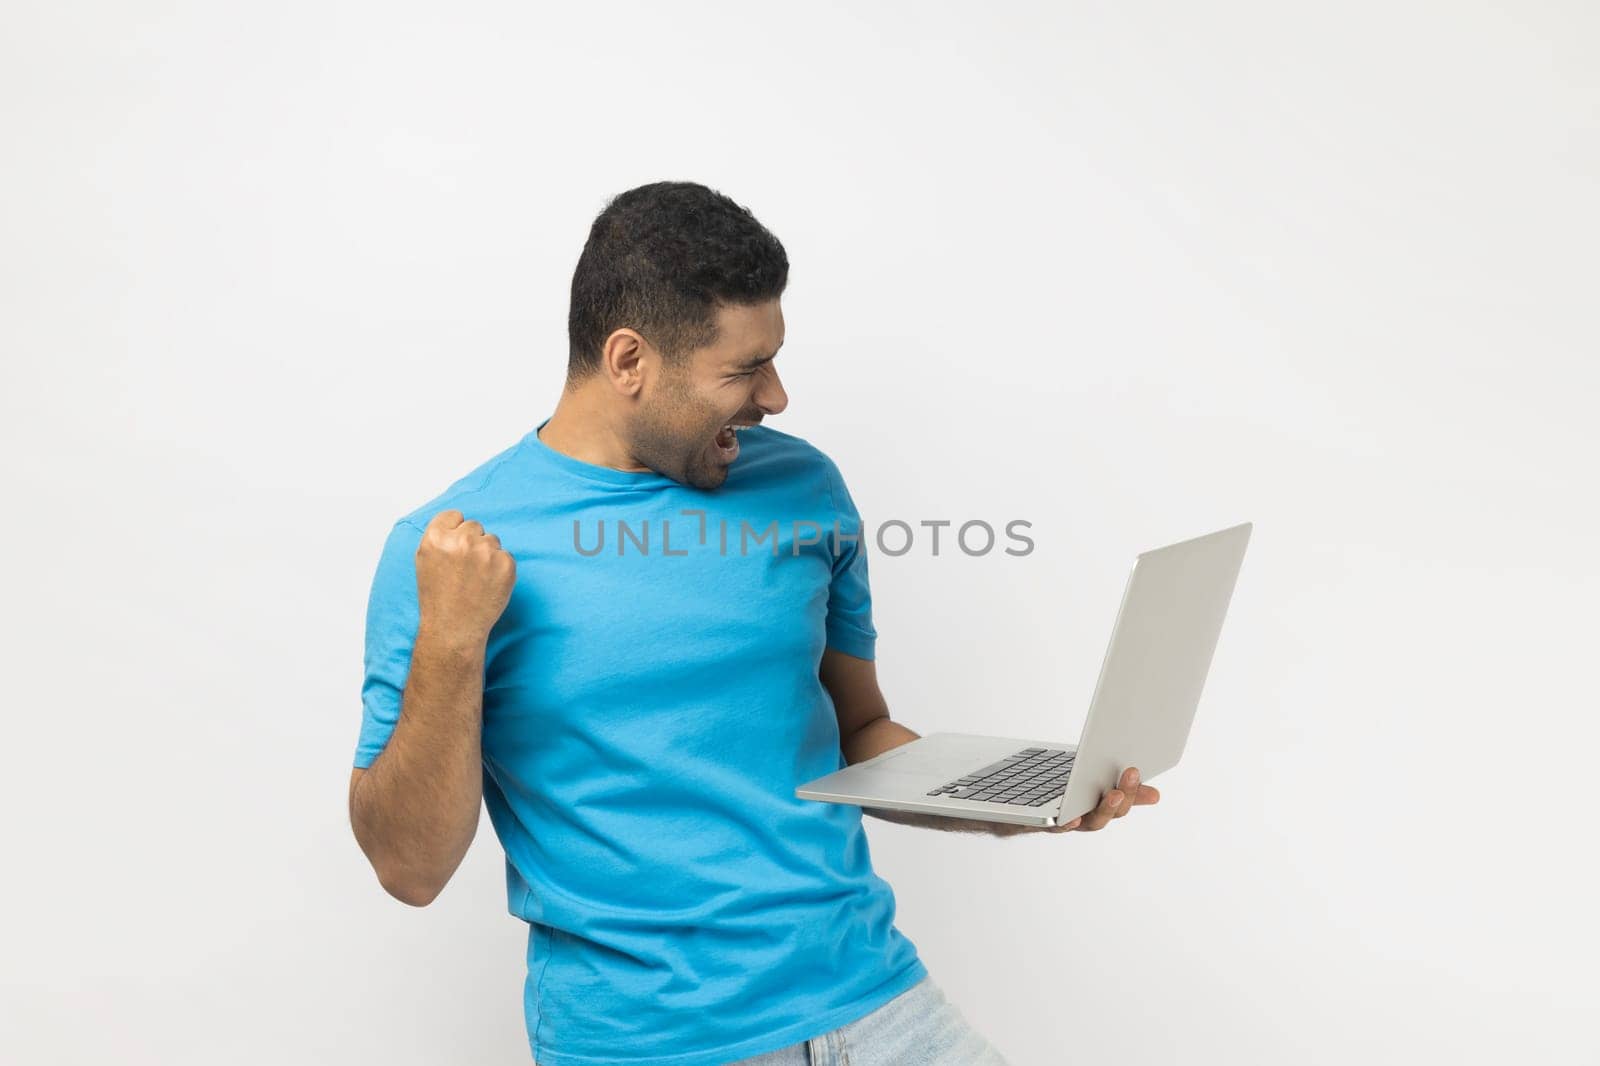 Joyful cheerful unshaven man in blue T- shirt standing holding laptop in hands, clenches fist, celebrating success, finishing project till deadline. Indoor studio shot isolated on gray background.